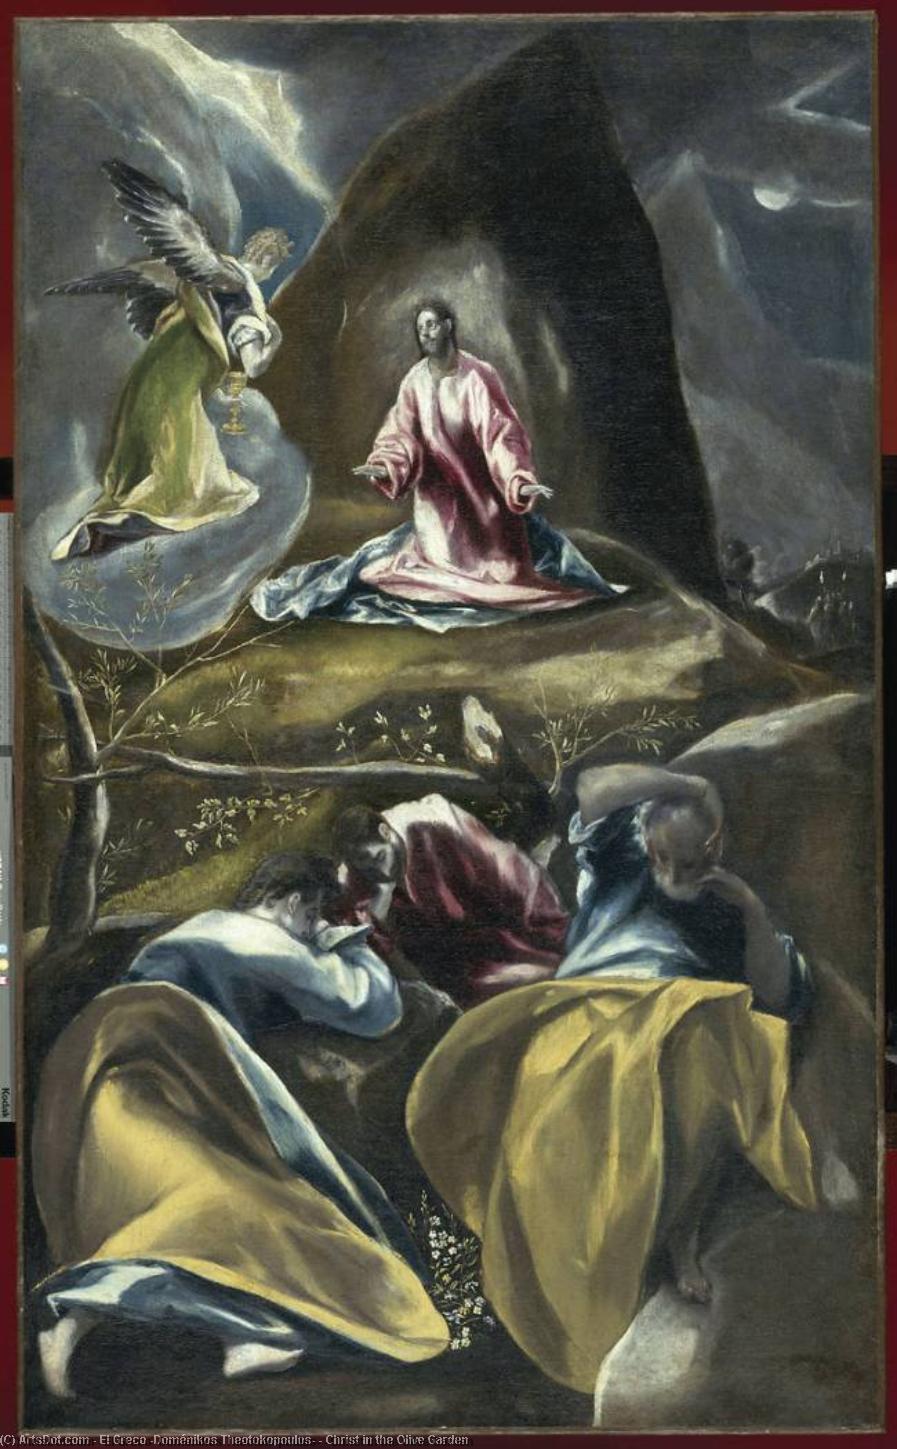 WikiOO.org - 백과 사전 - 회화, 삽화 El Greco (Doménikos Theotokopoulos) - Christ in the Olive Garden